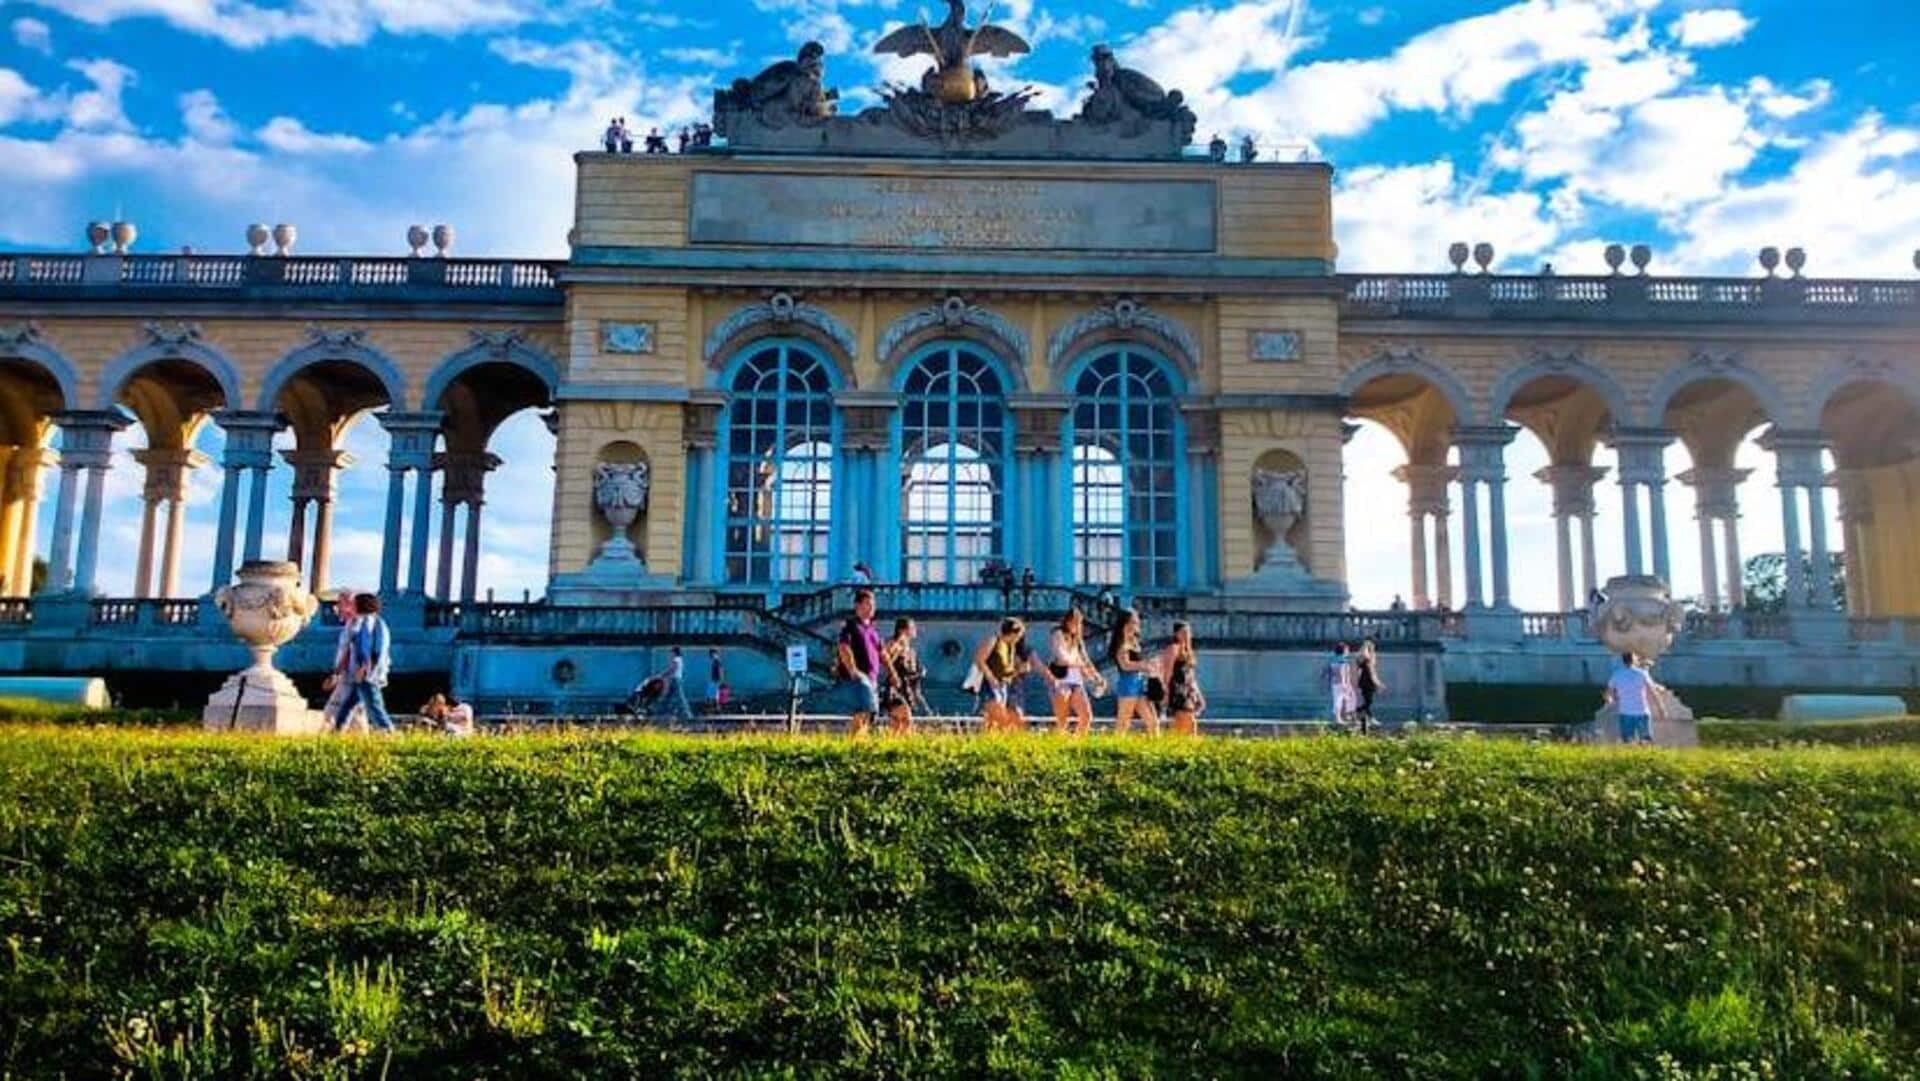 Hop on Vienna's imperial architecture trail with these travel recommendations